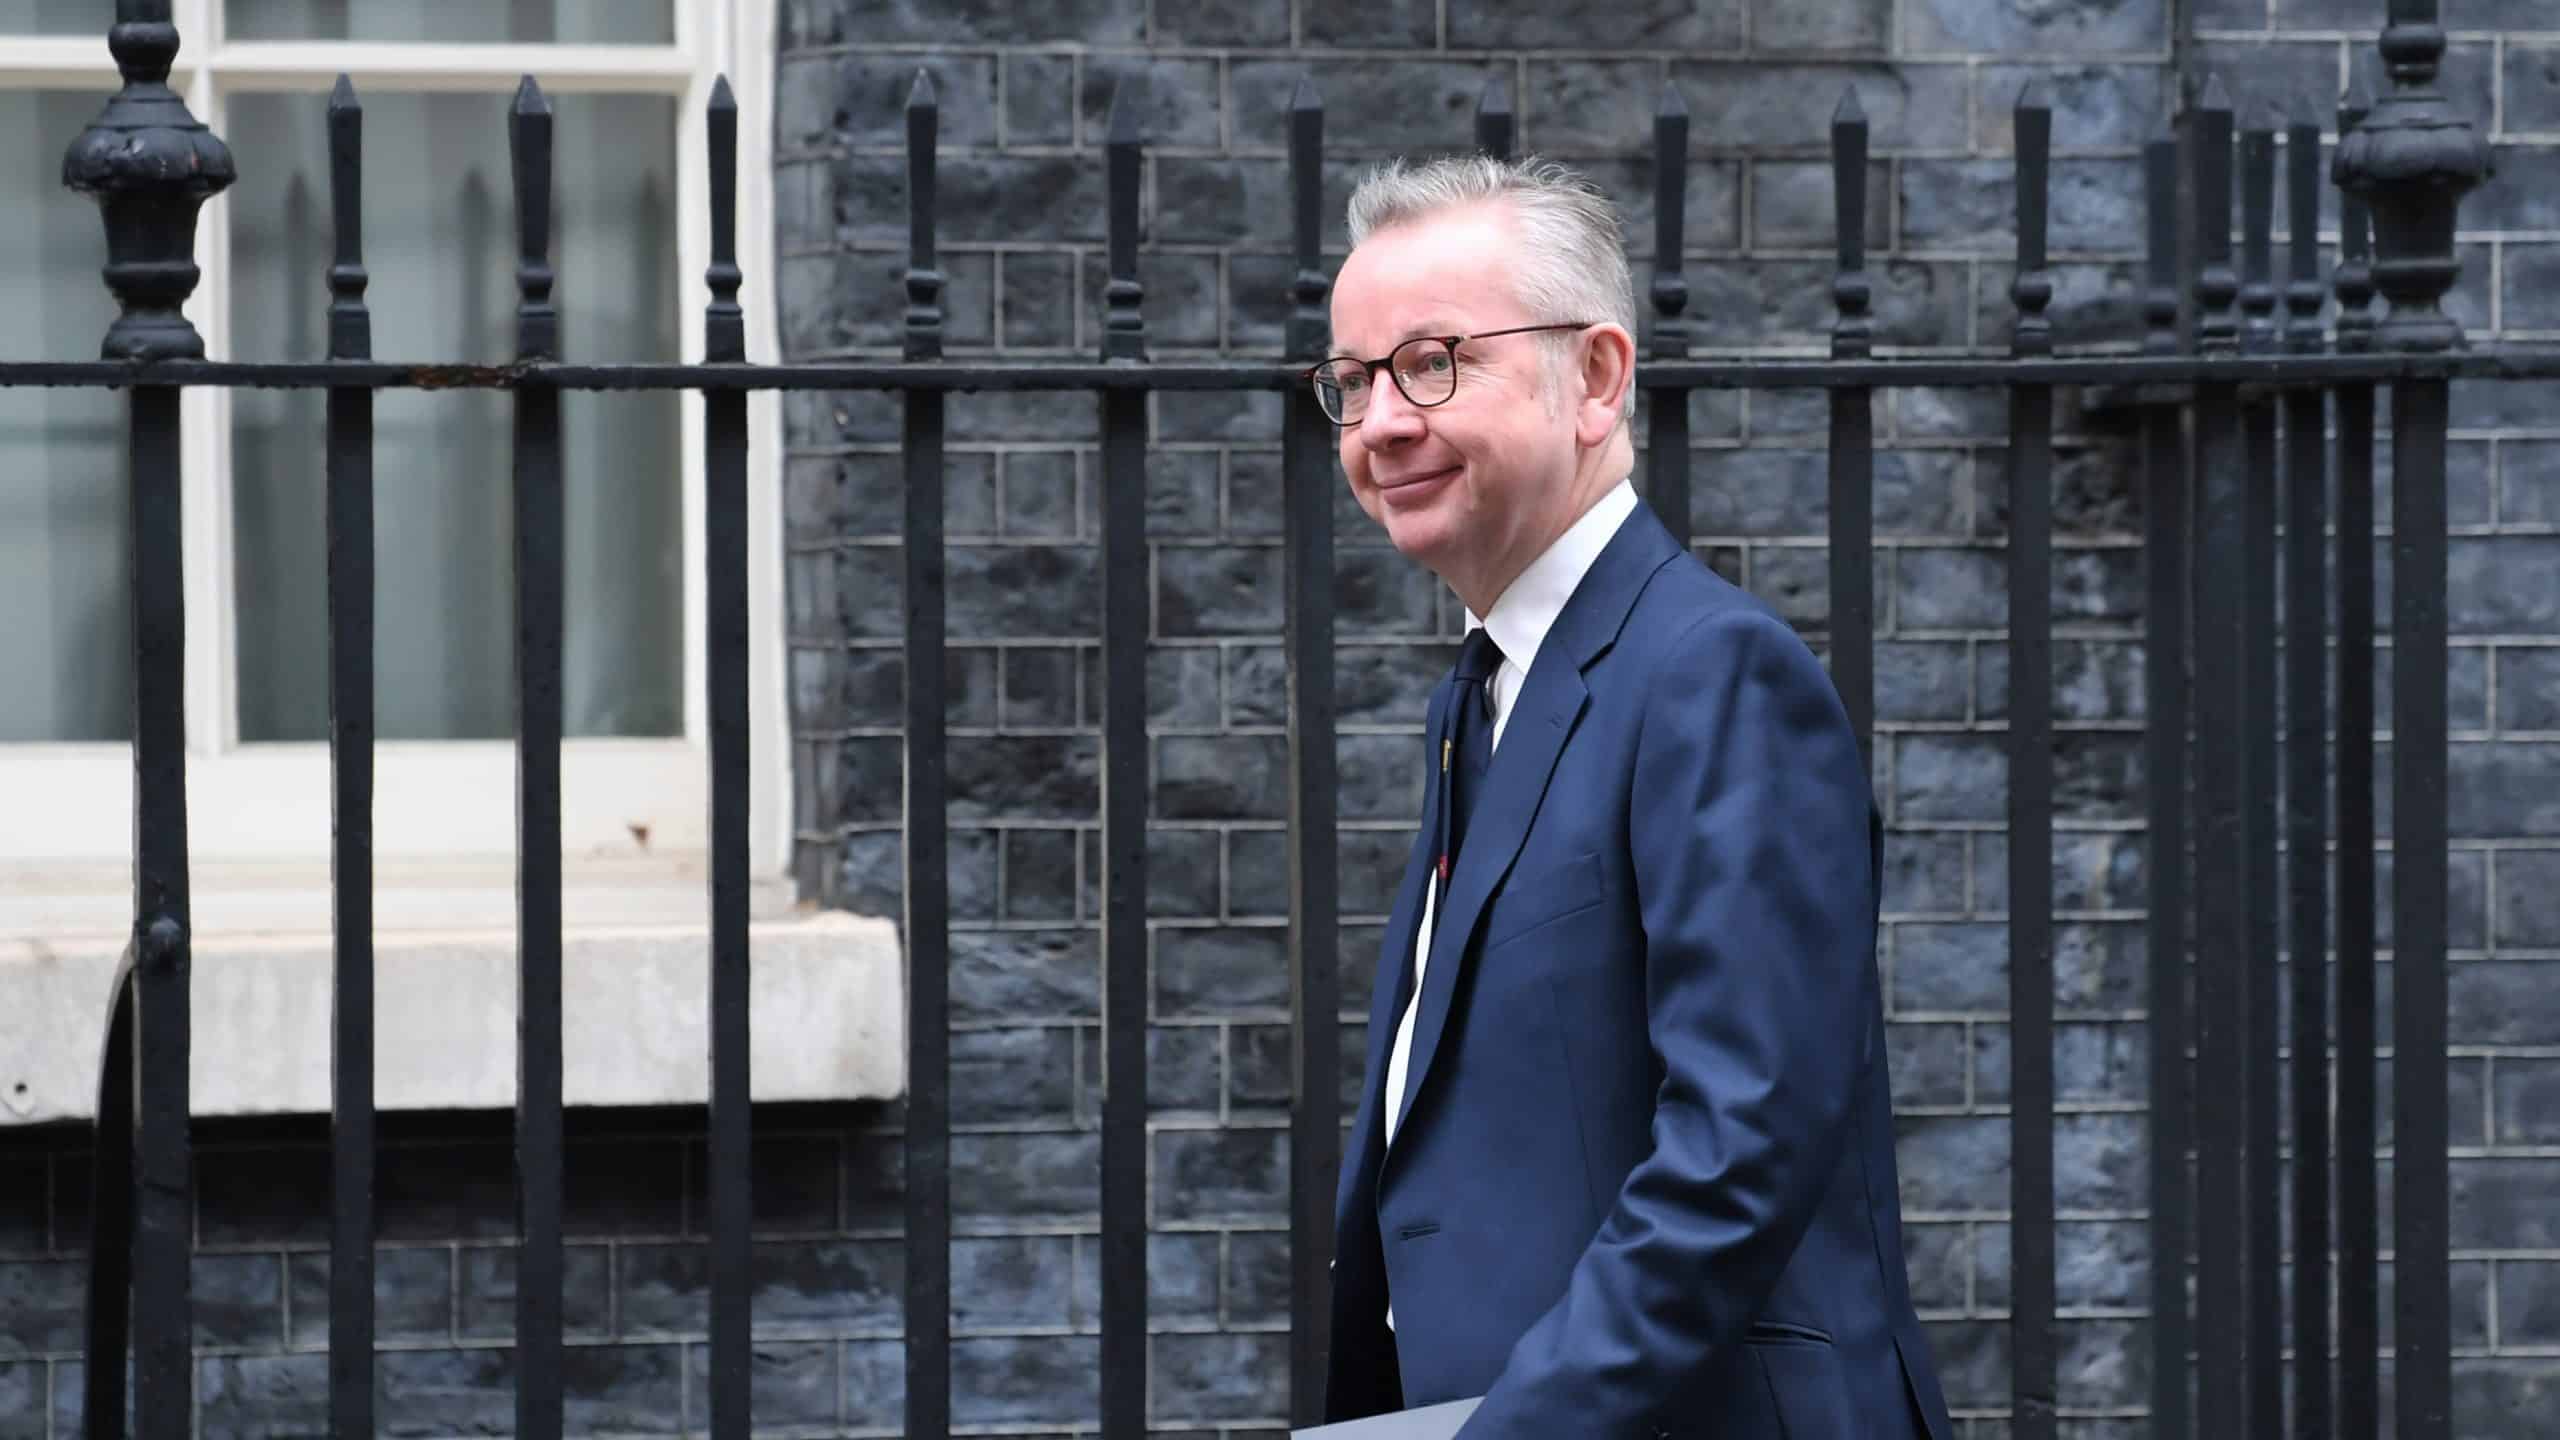 Porn pic appears on Michael Gove’s Twitter account